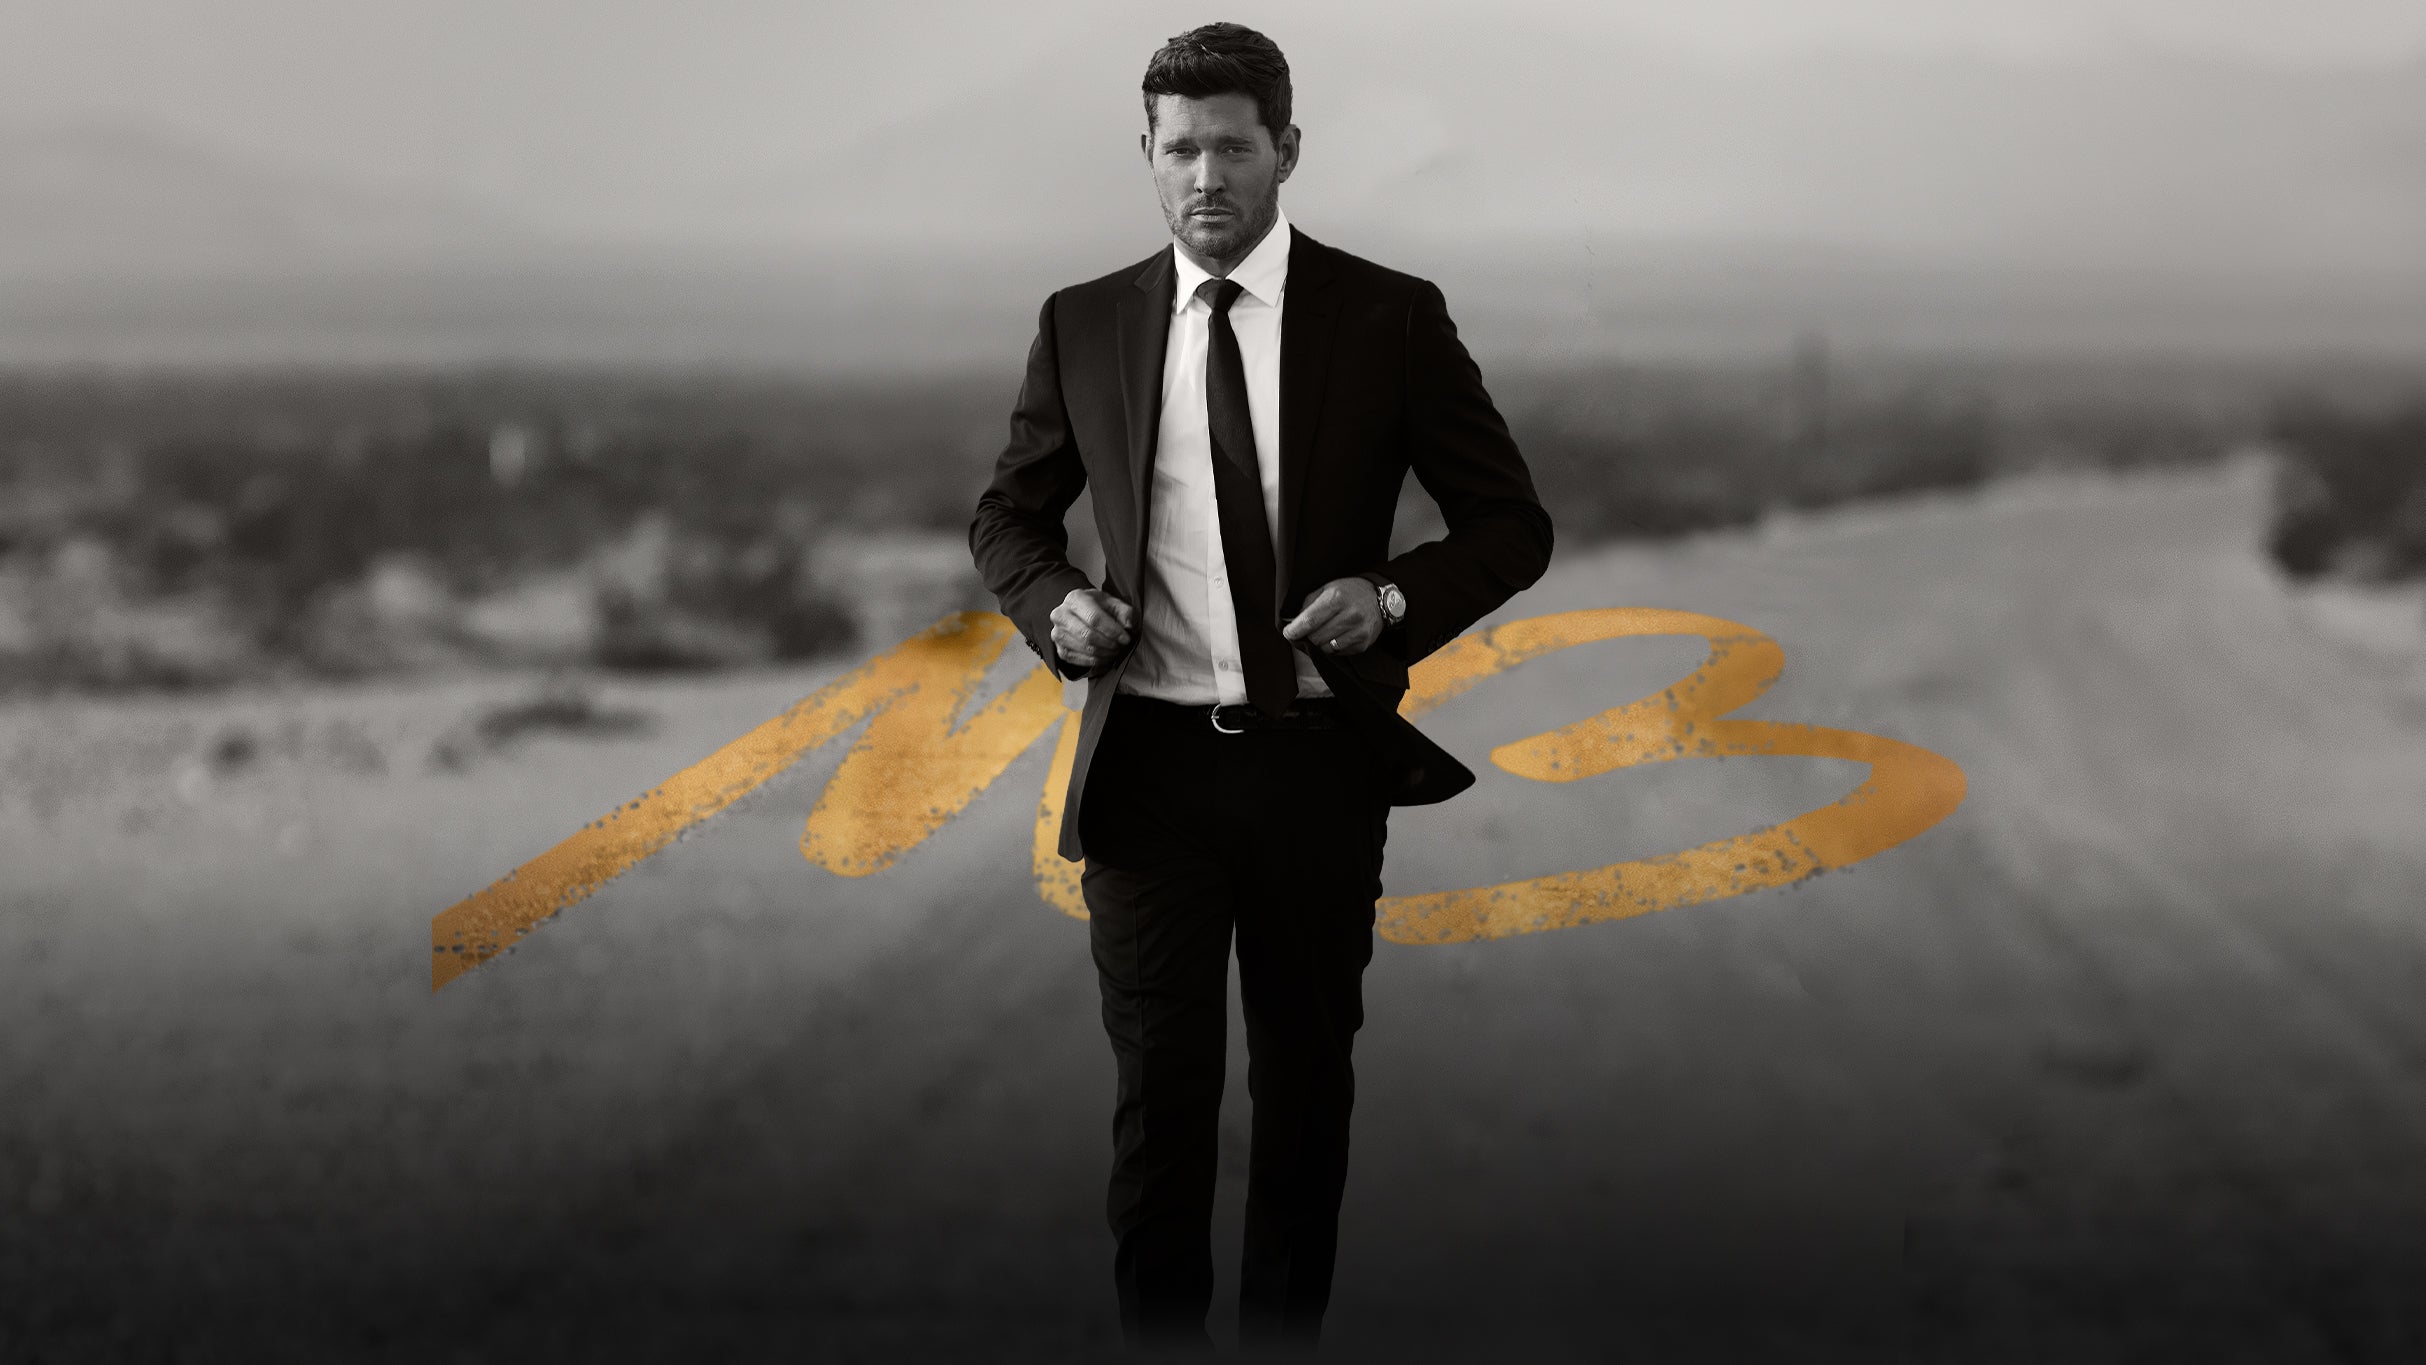 An Evening with Michael Bublé at Capital One Arena